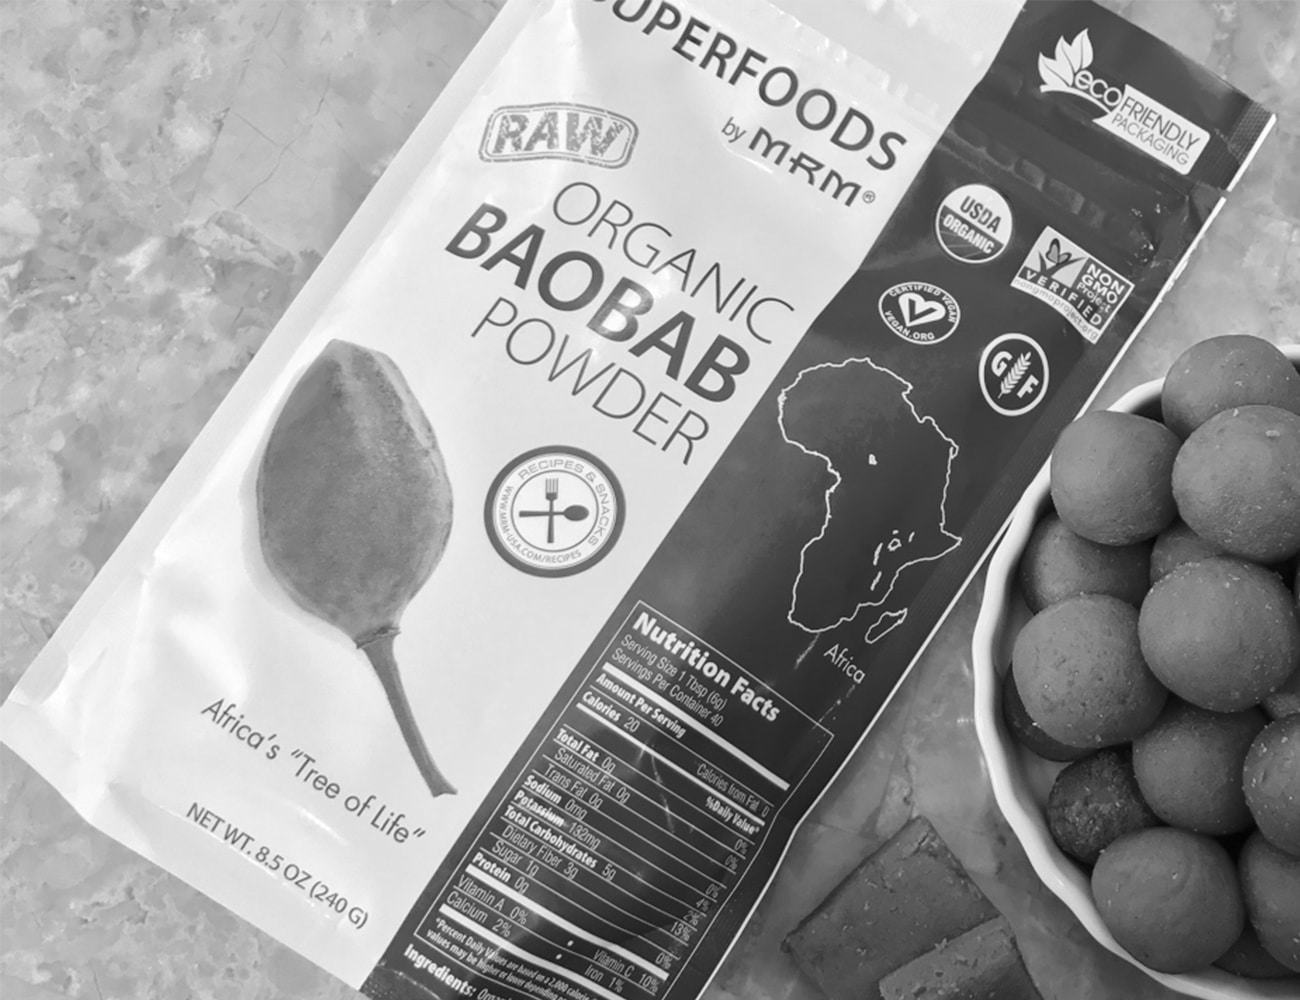 The Baobab Fruit in a Package